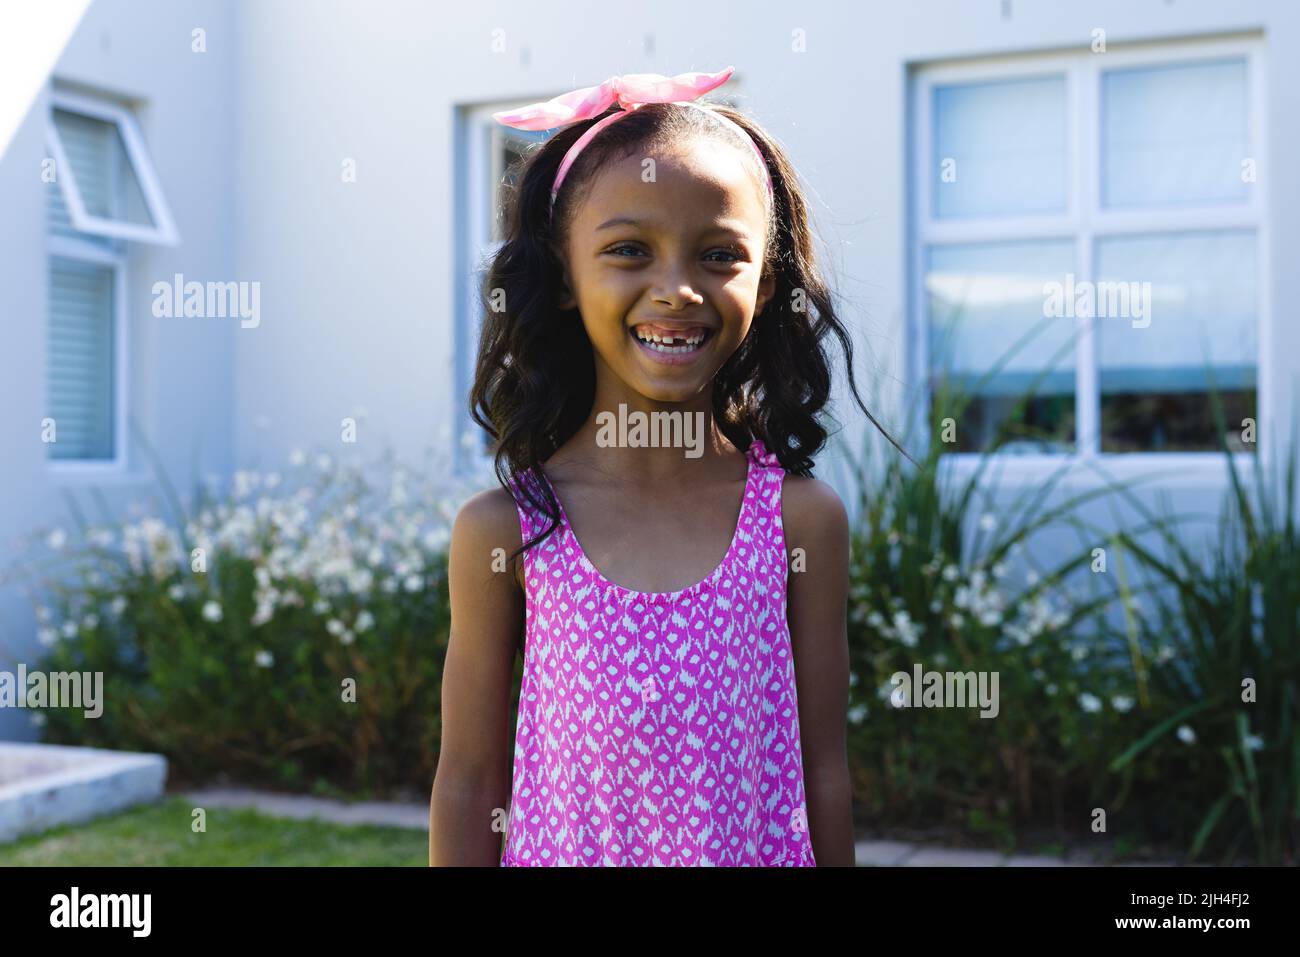 Portrait of biracial girl with missing tooth smiling while standing against house in yard Stock Photo